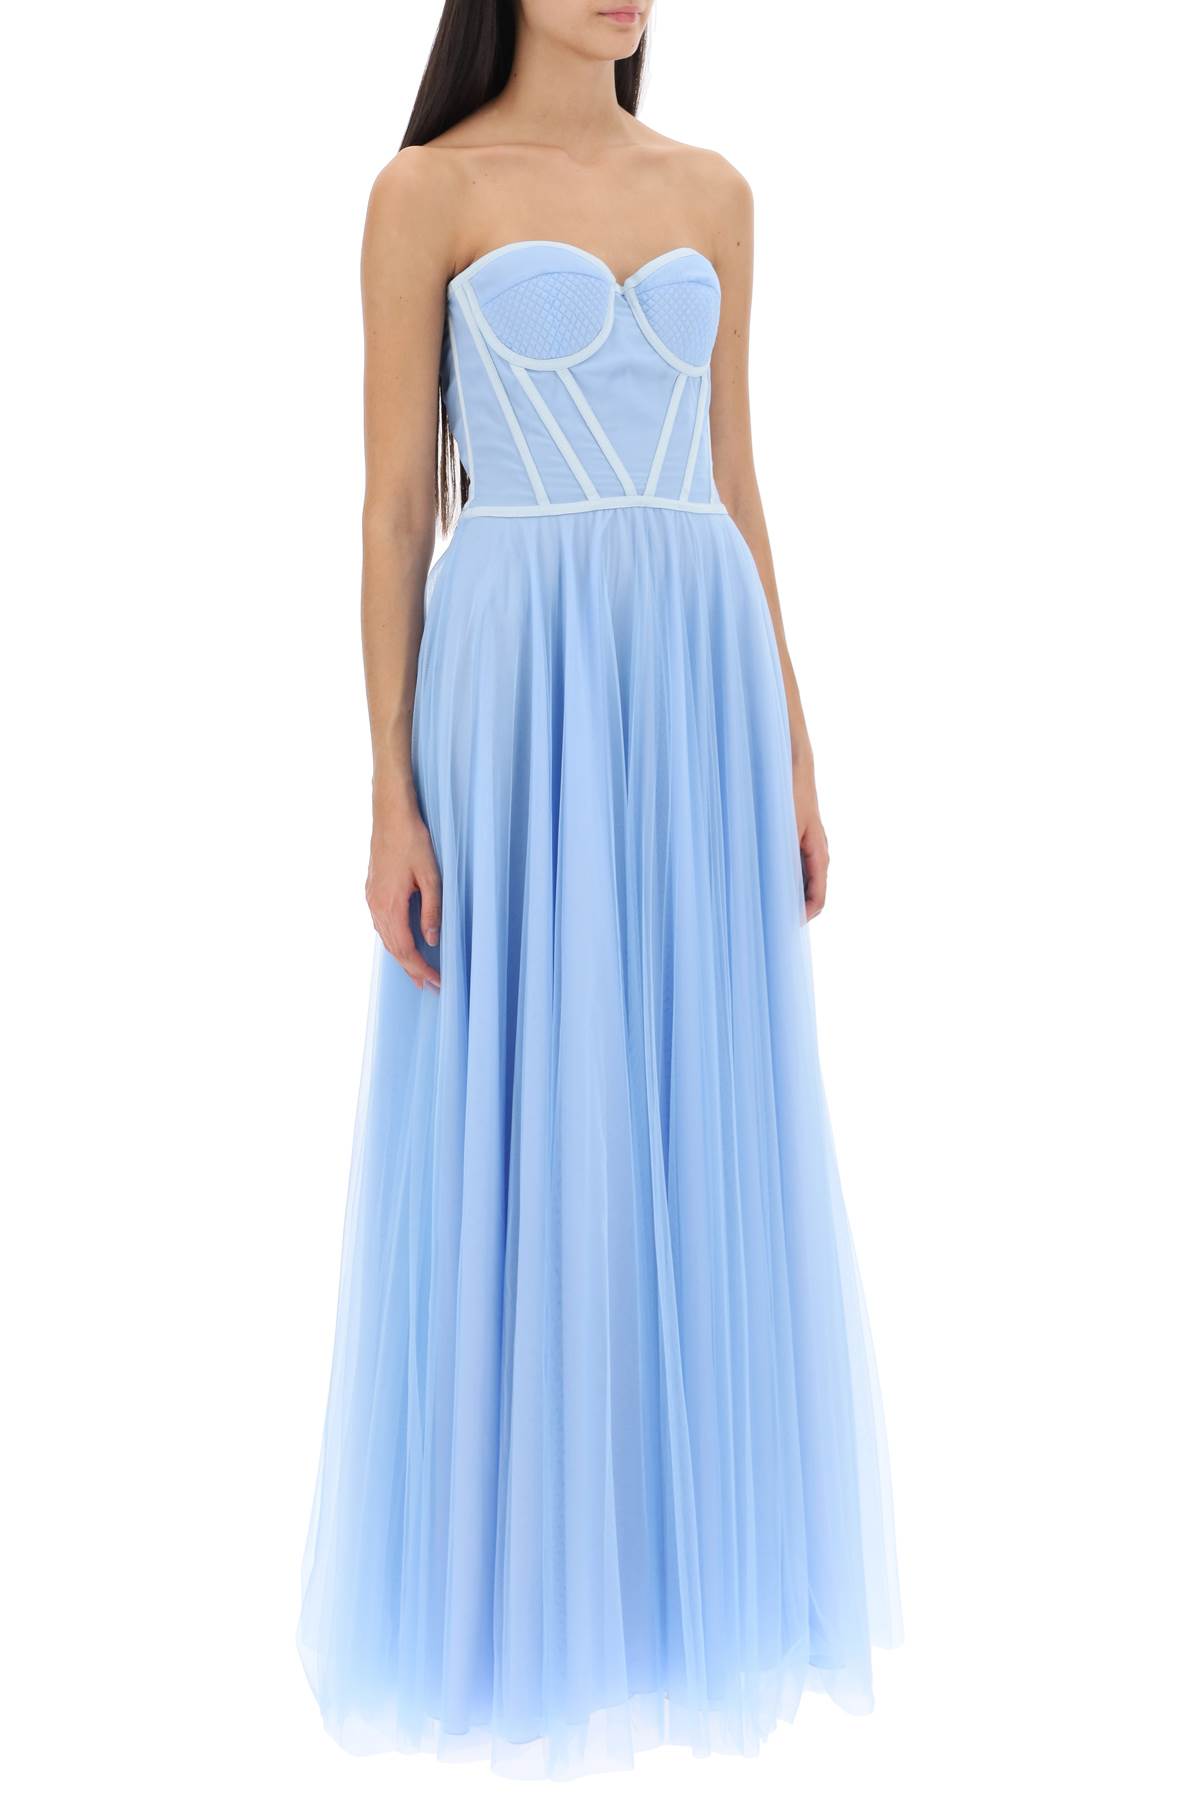 Shop 19:13 Dresscode Maxi Tulle Bustier Gown In Sky (light Blue)